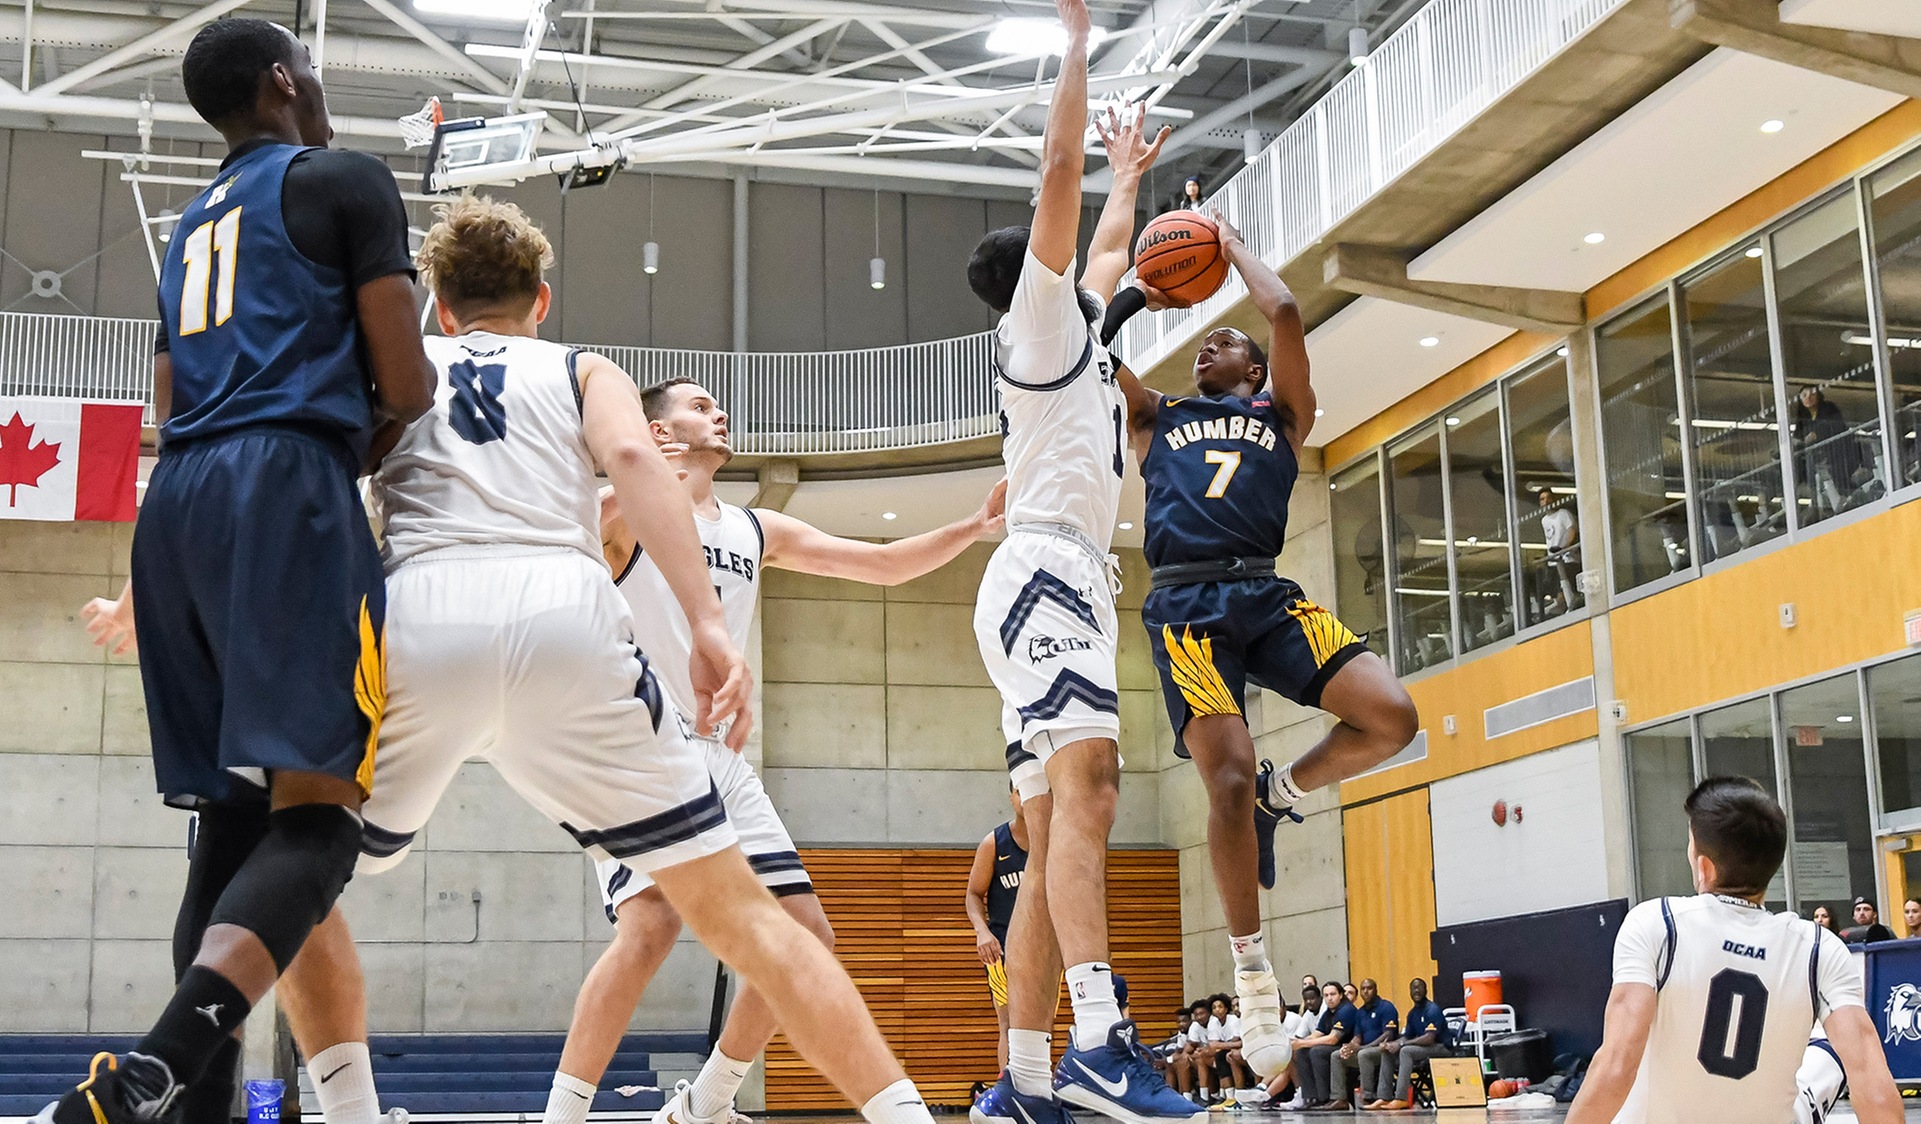 CASCART'S 29 POINTS LIFTS No. 4 HUMBER PAST UTM, 91-77